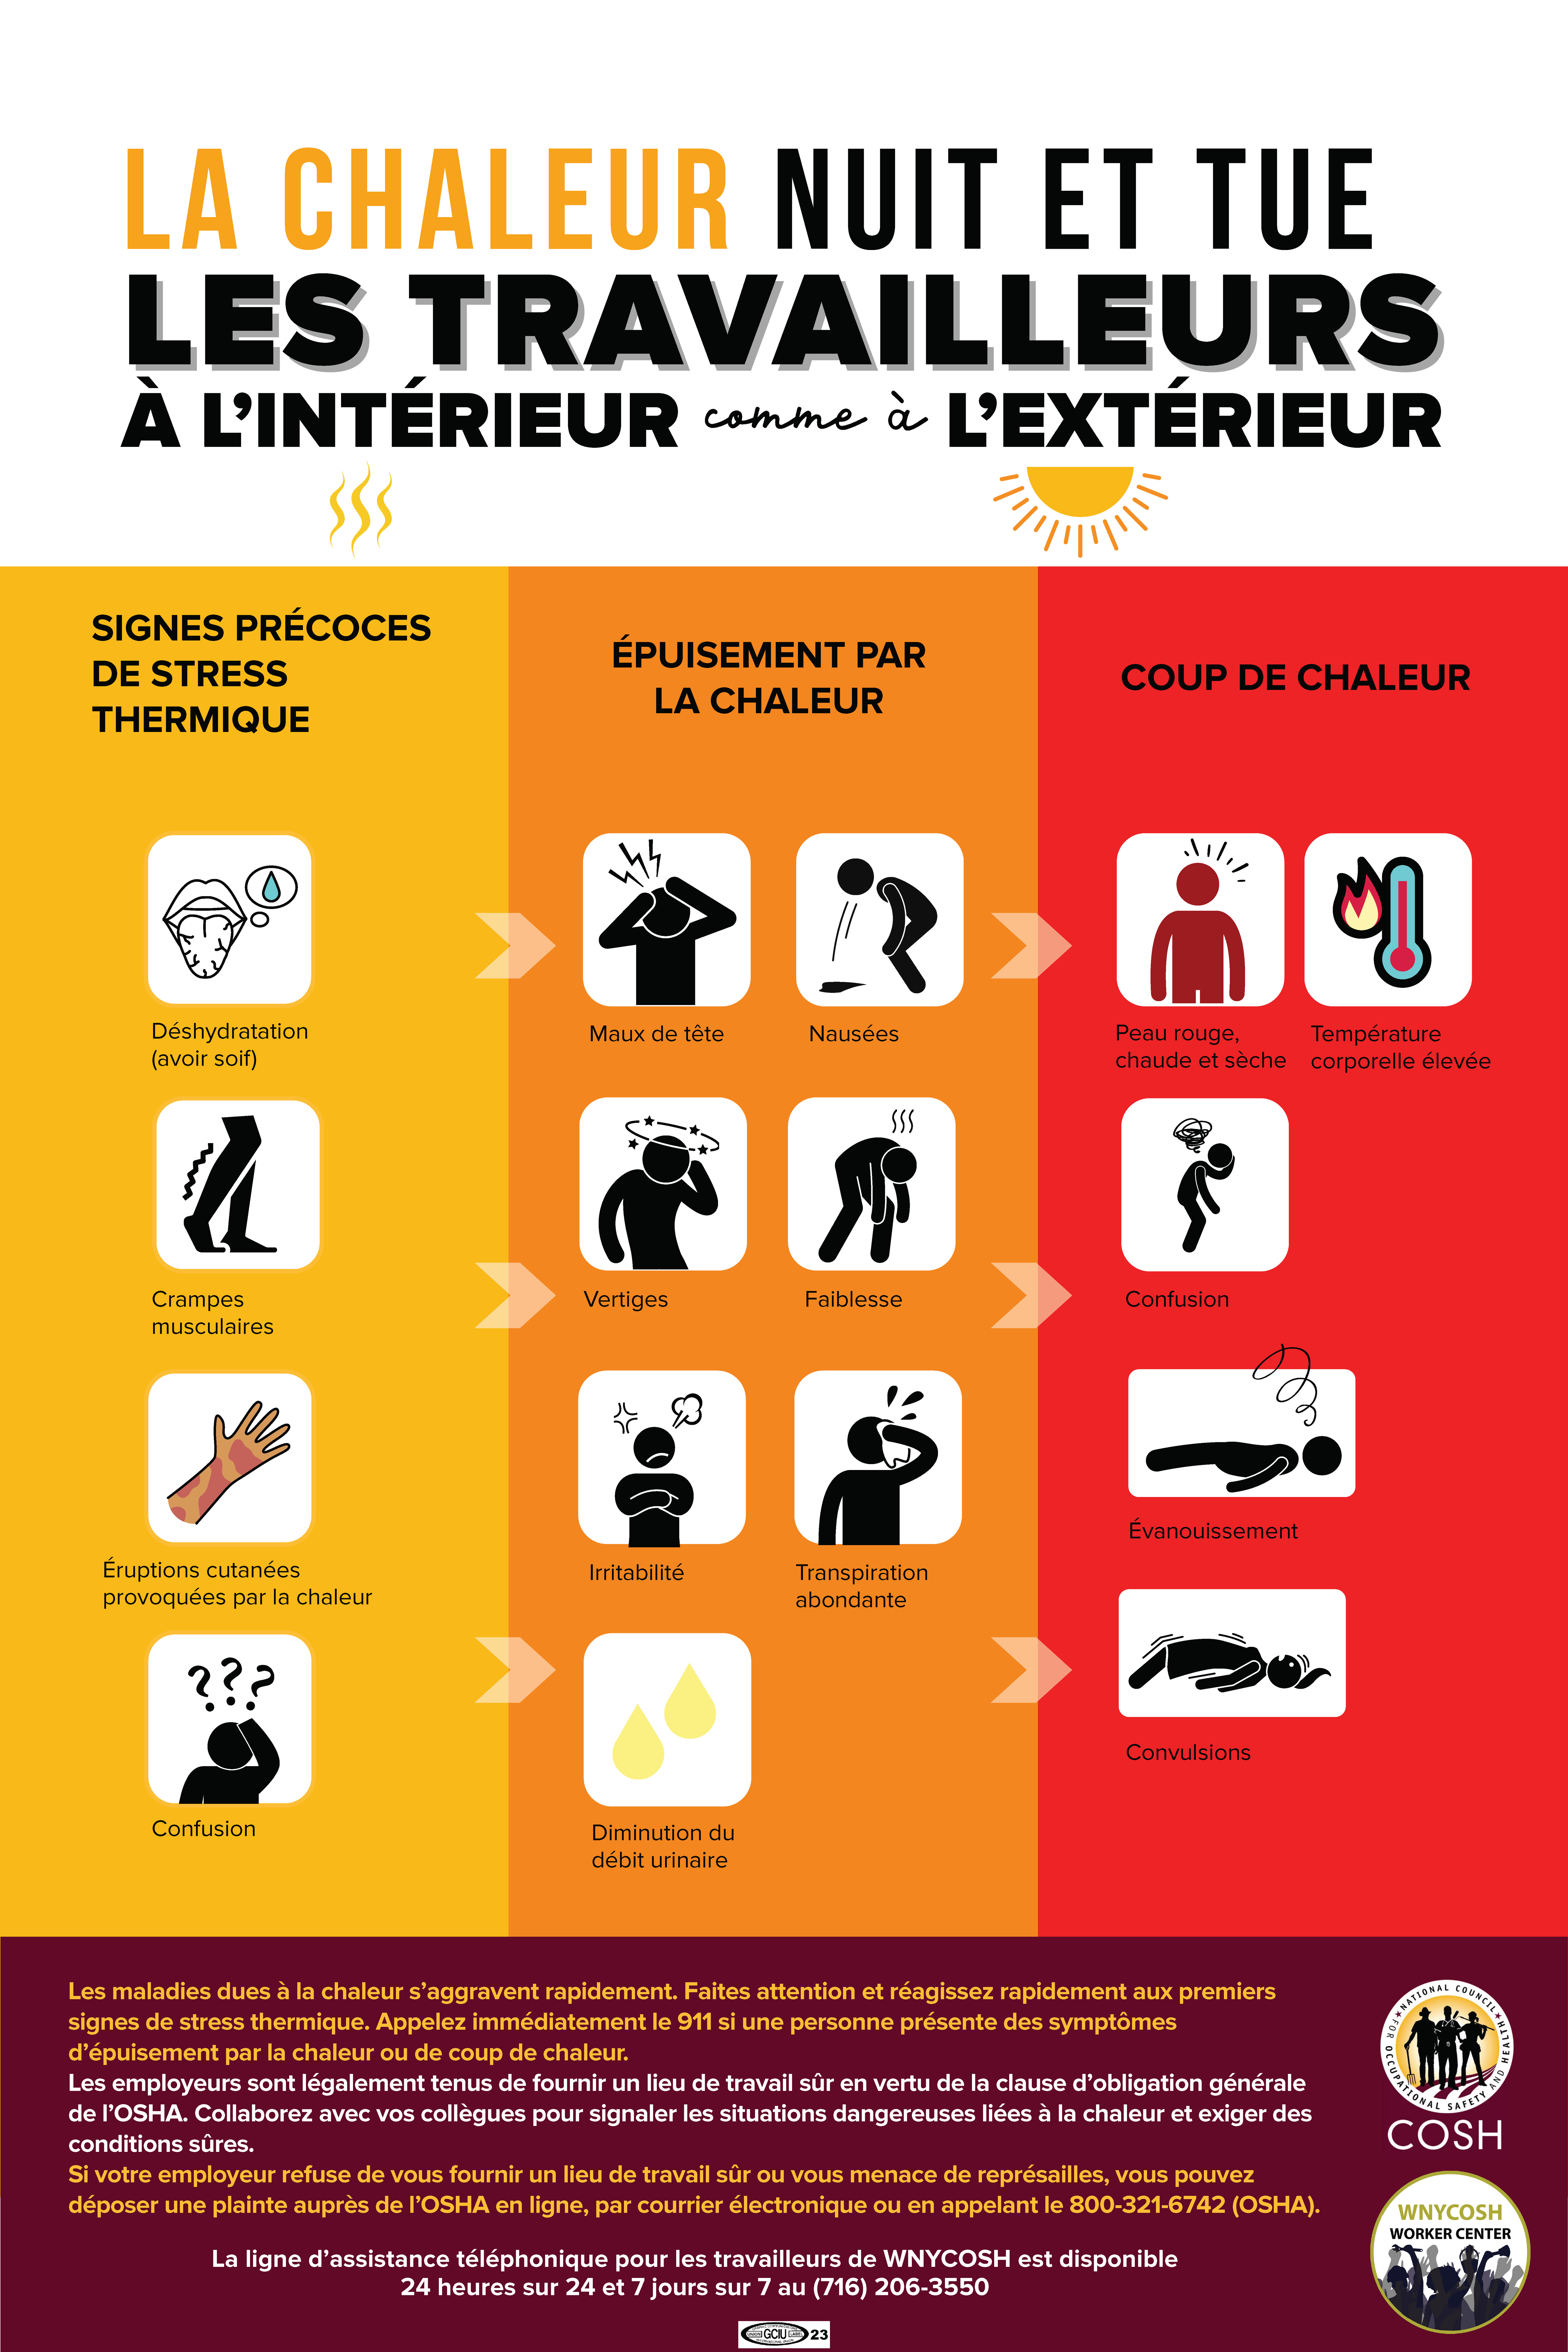 Poster for Heat Safety in French